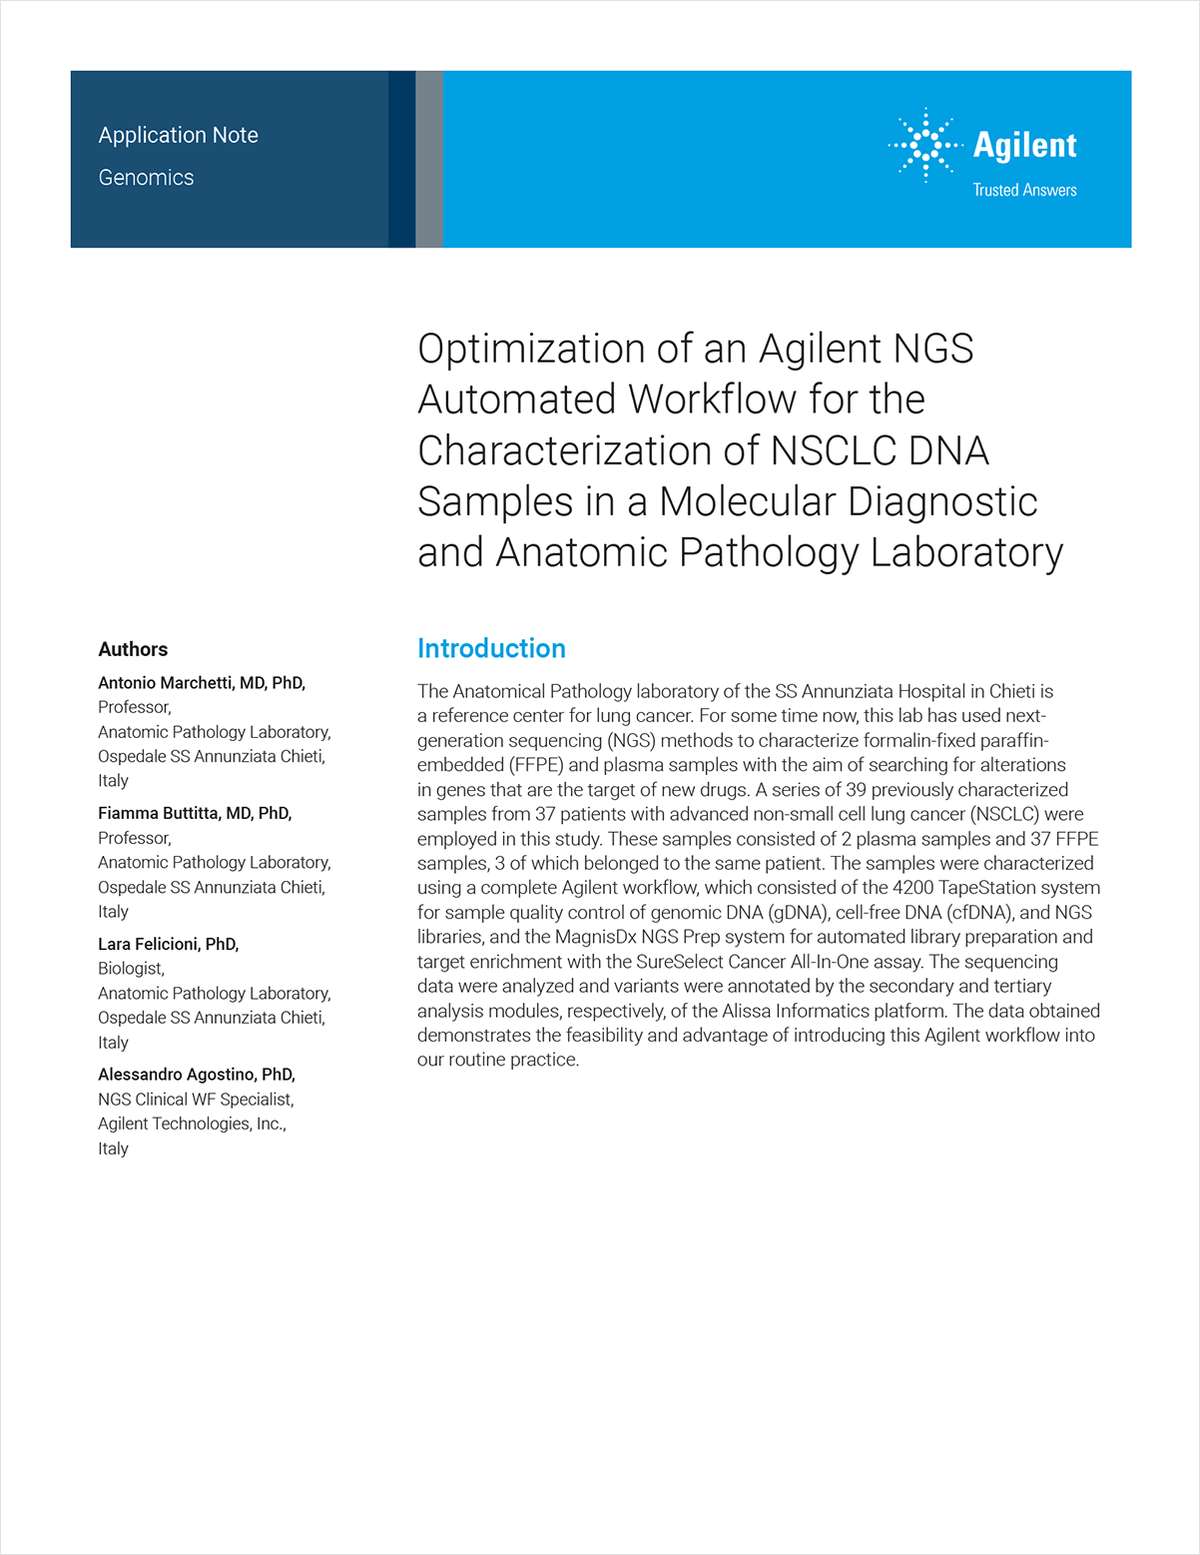 Optimization of an Agilent NGS Automated Workflow for the Characterization of NSCLC DNA Samples in a Molecular Diagnostic and Anatomic Pathology Laboratory